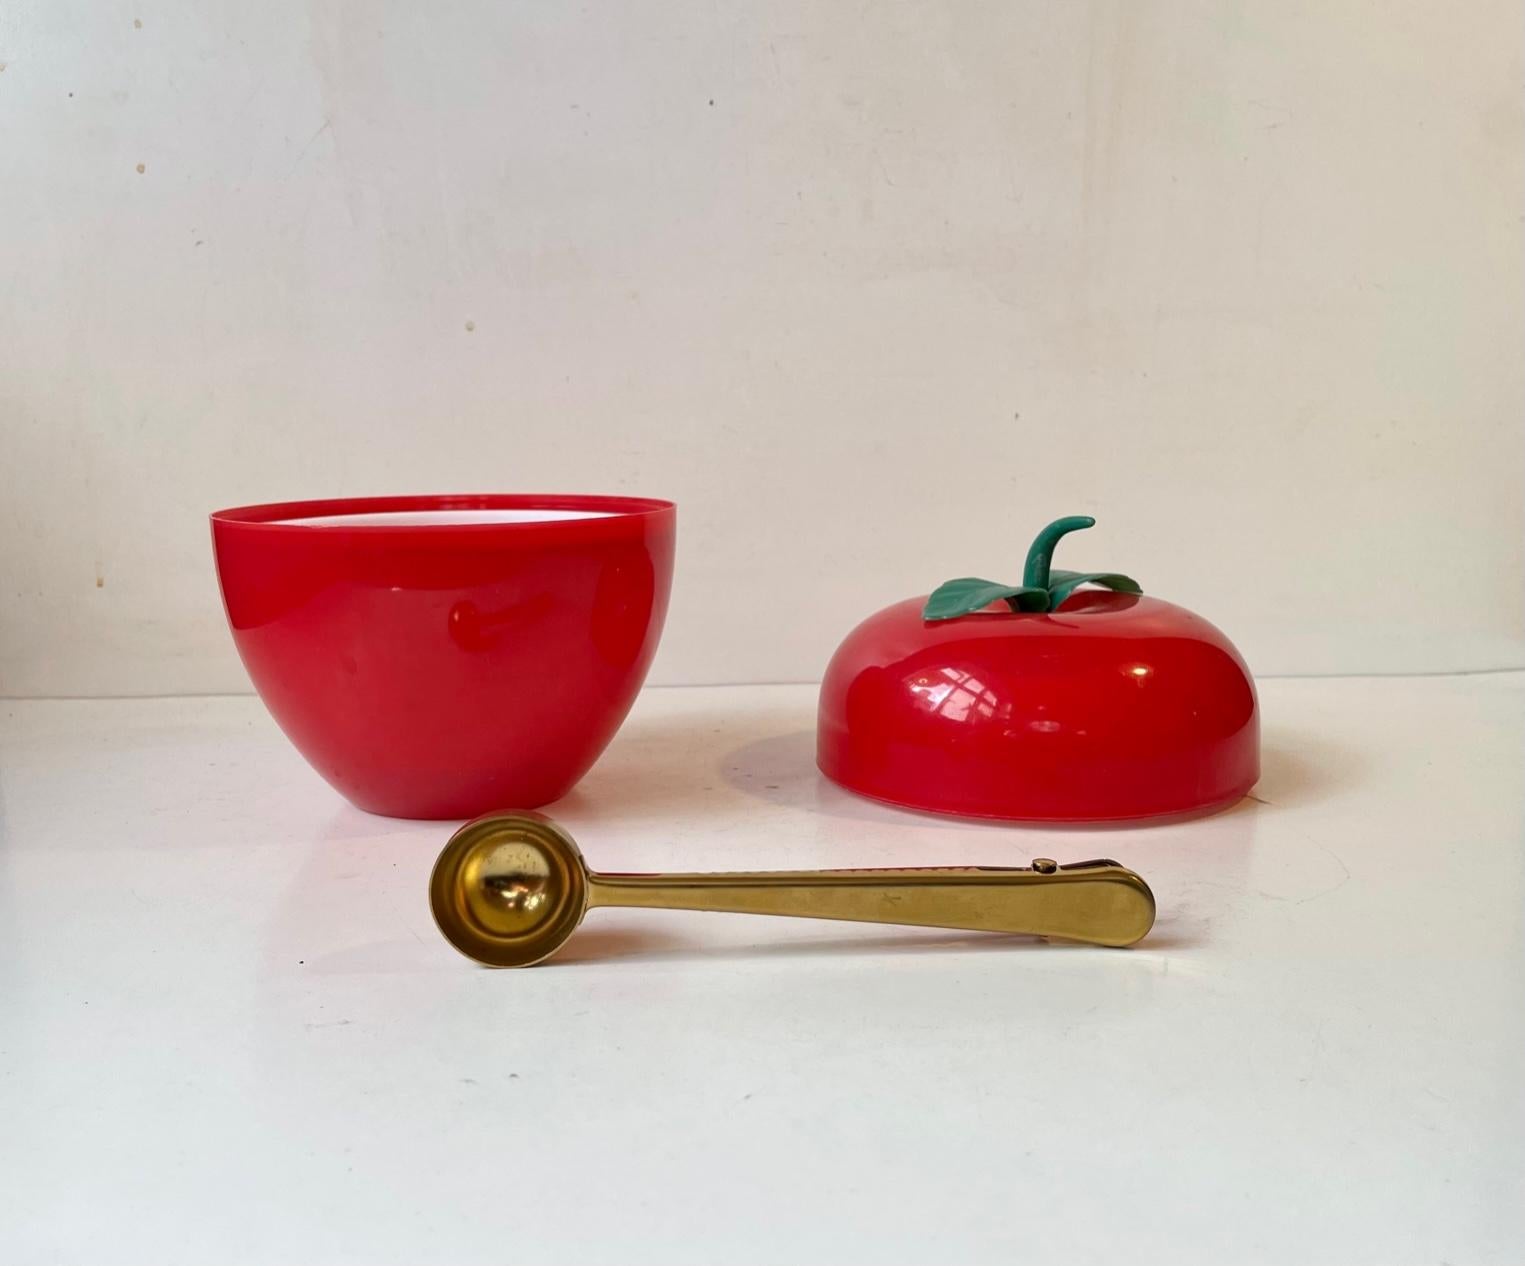 1970s Hong Kong made pop art ice bucket in the shape of a large red apple. Its made from plastic and features white thermos and a tong/spoon is brass alloy aluminum. Measurements: H: 19 cm, D: 15.5 cm.